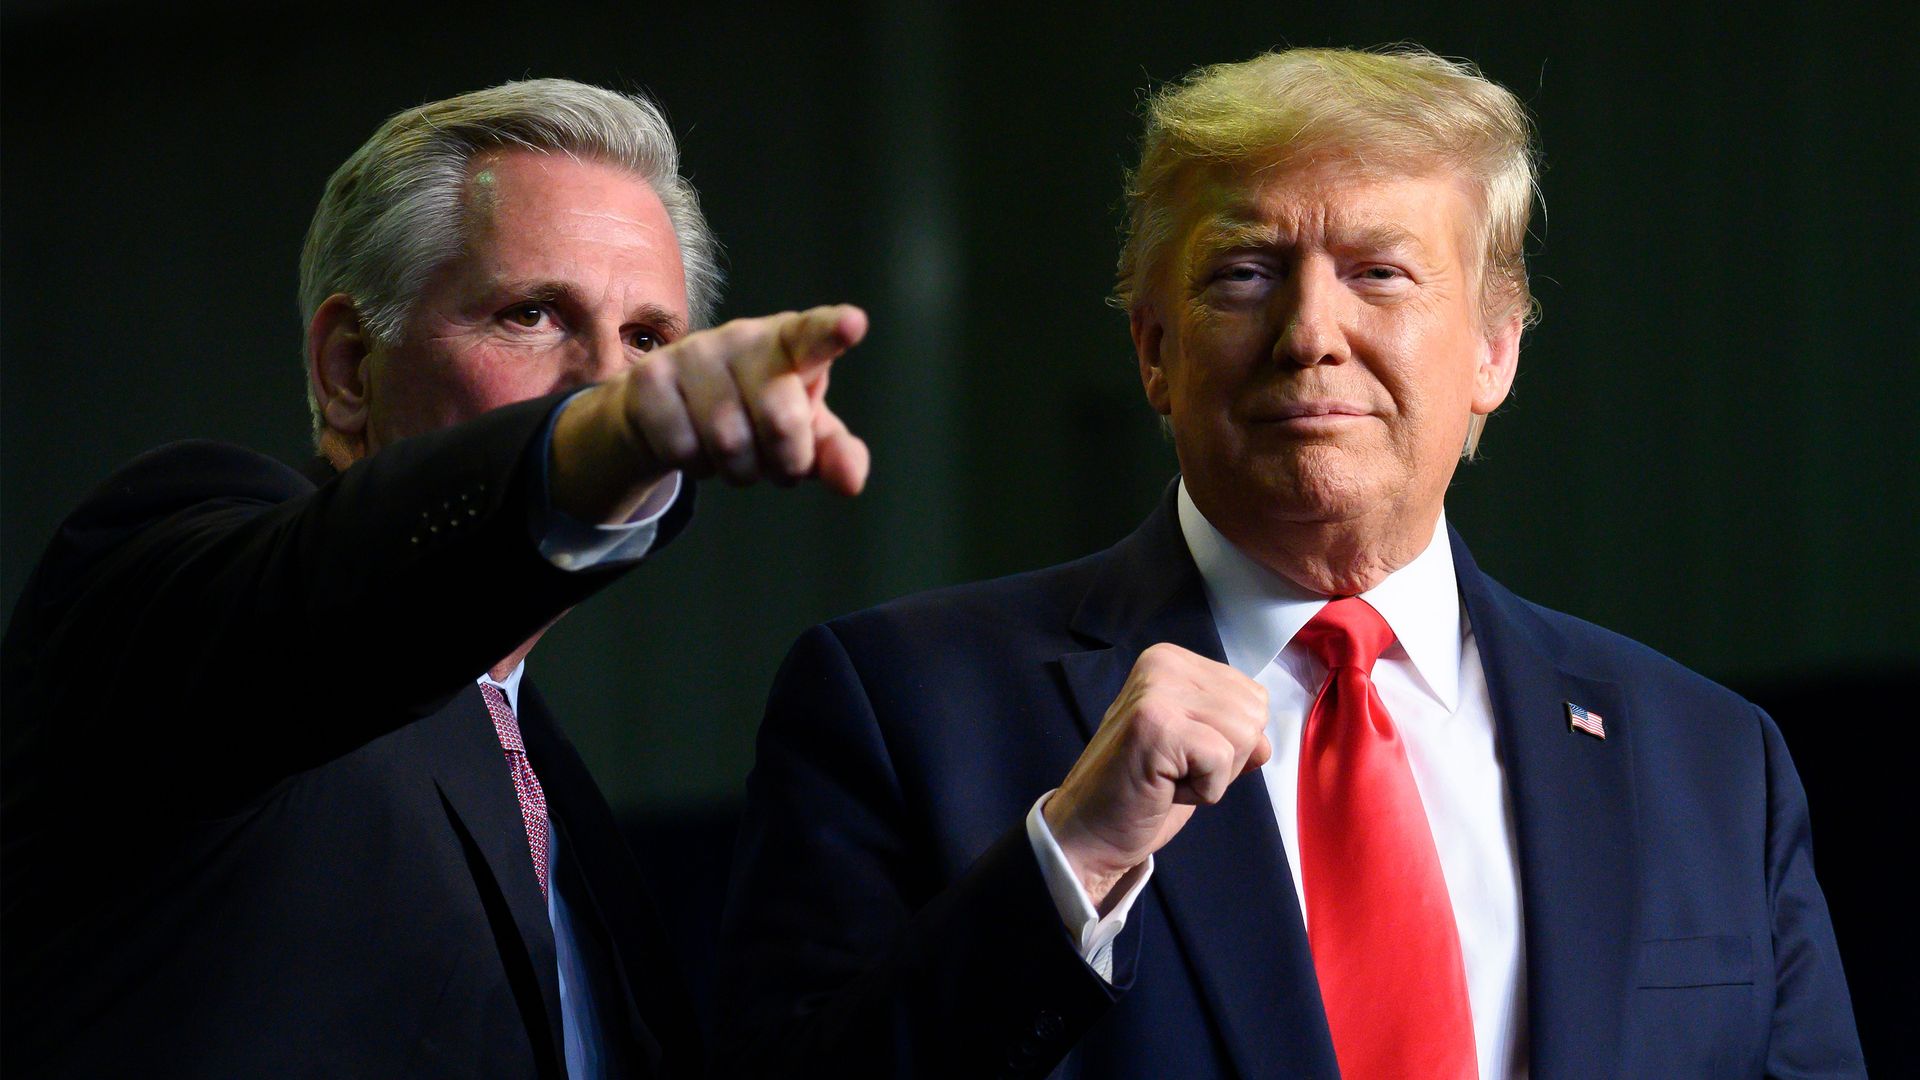 House GOP Leader Kevin McCarthy points a finger and then-President Donald Trump points his fist at a 2020 event